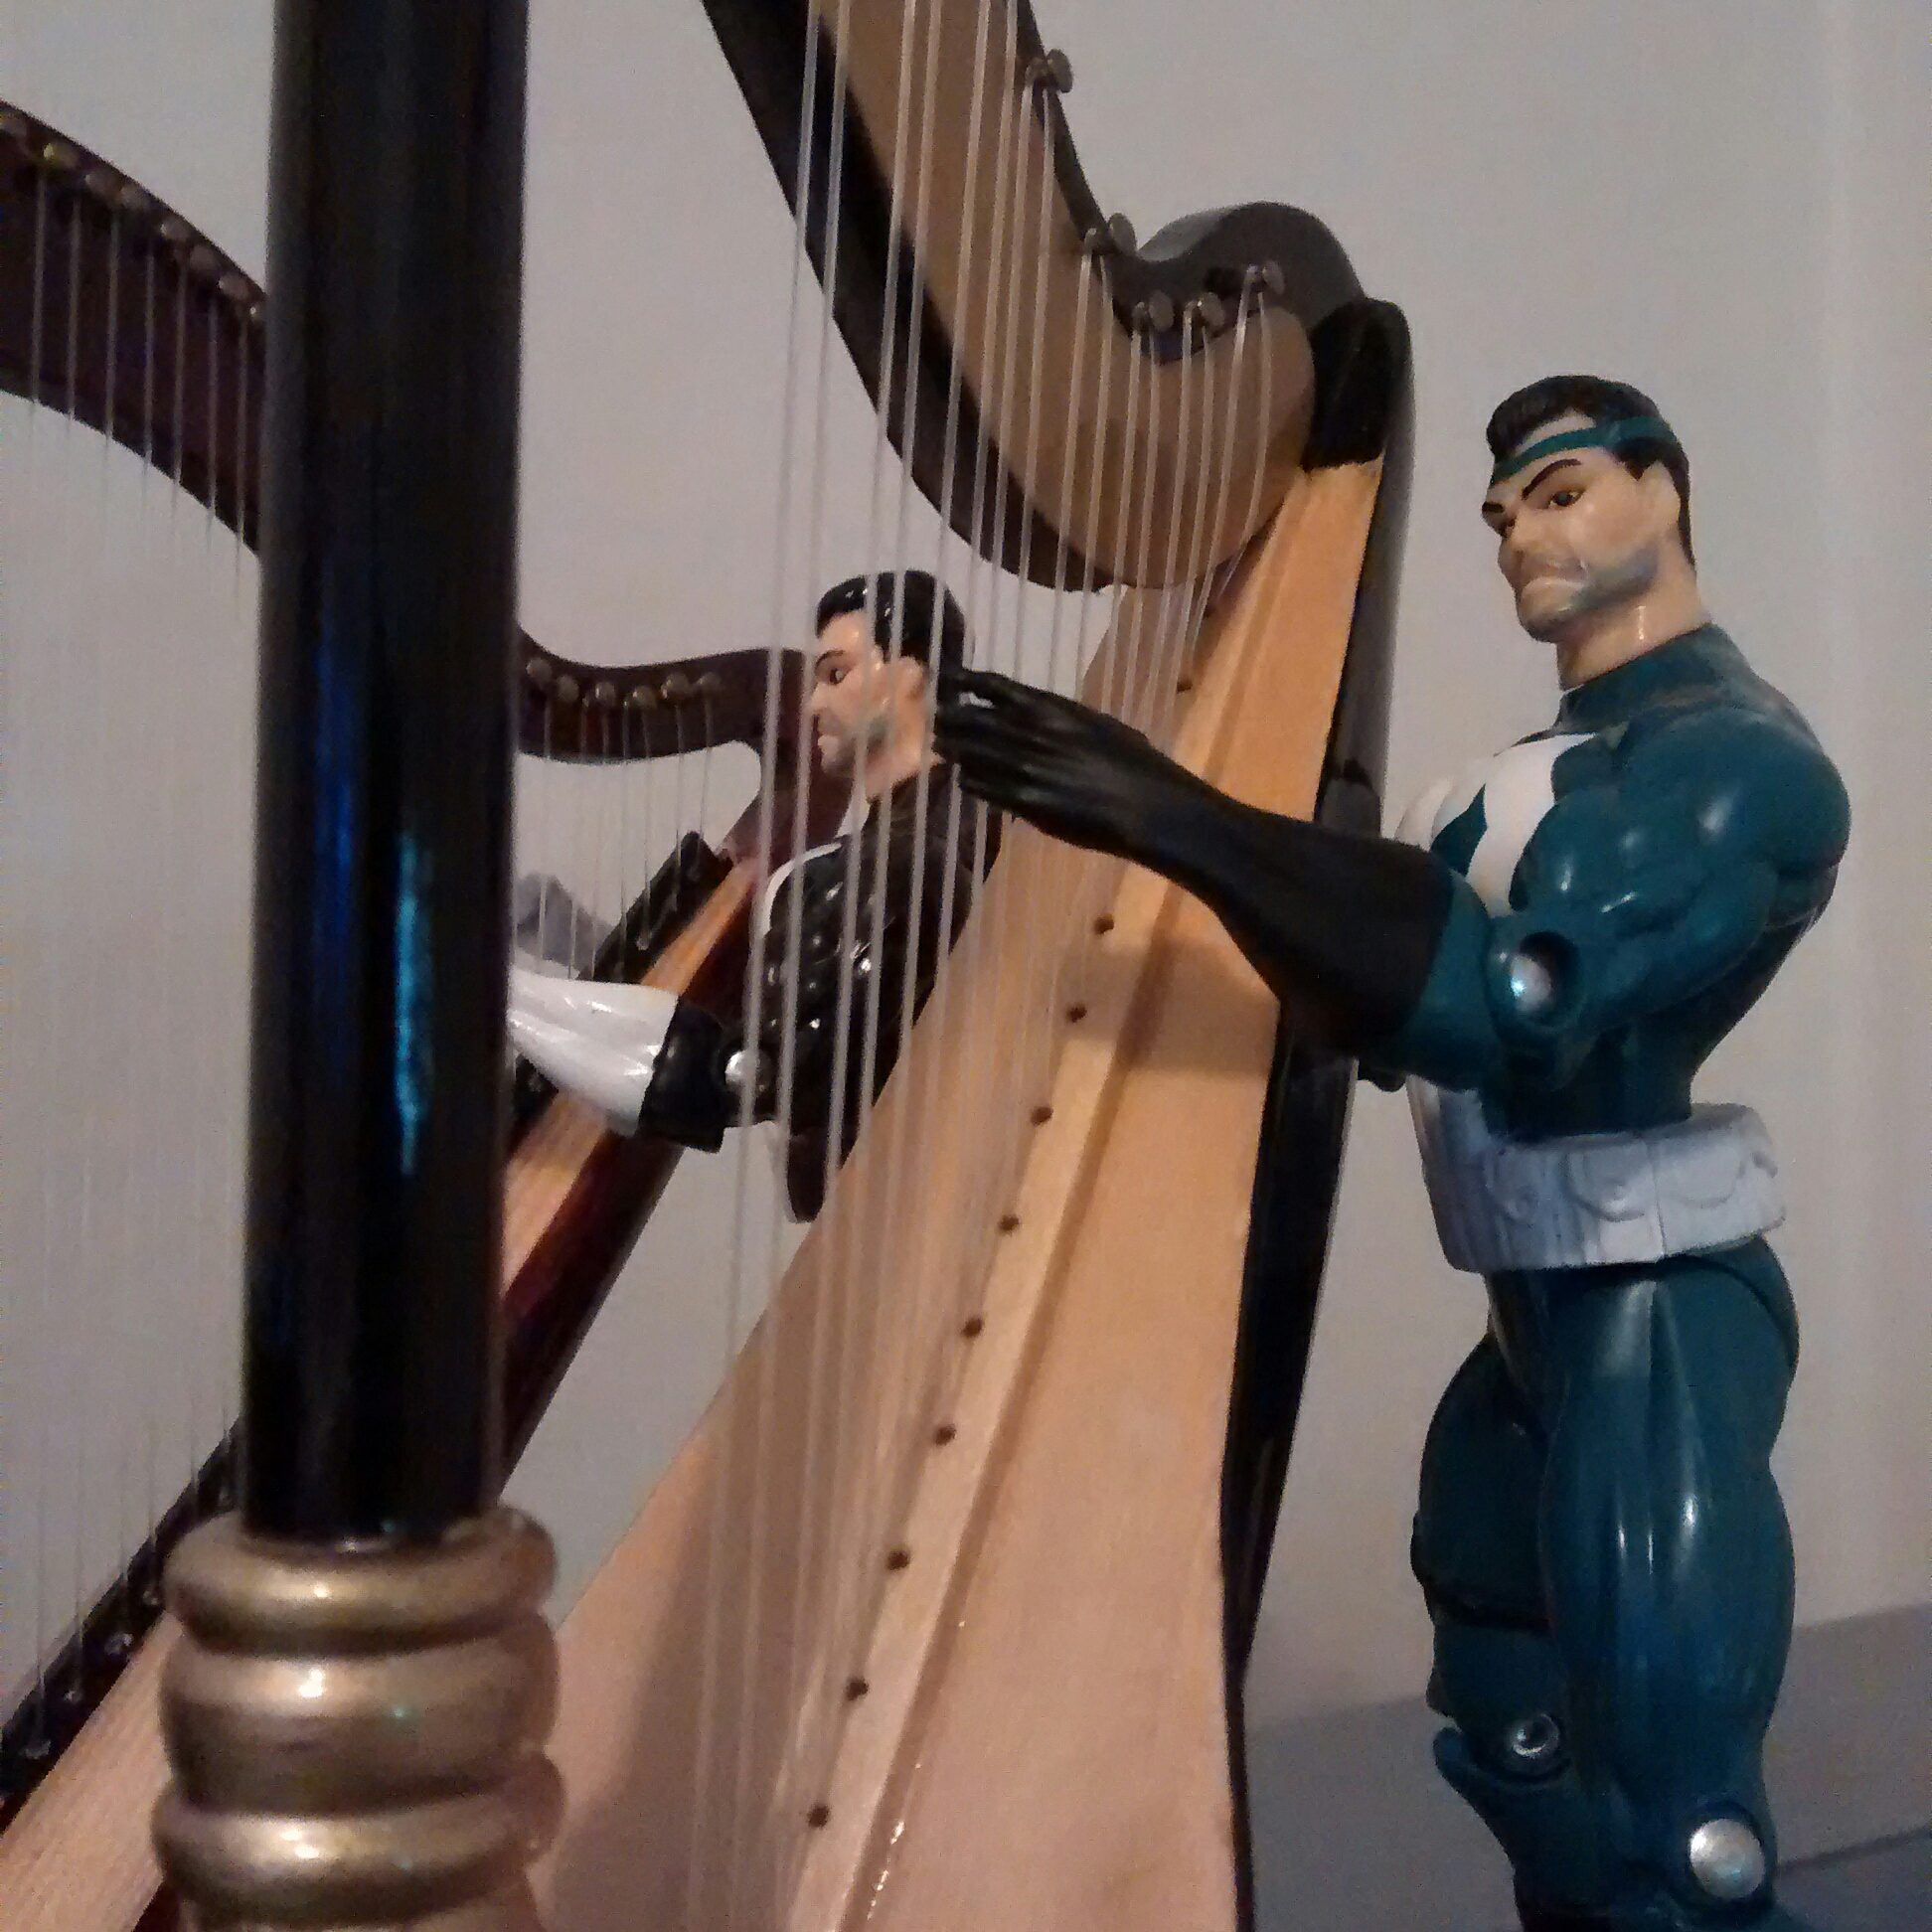 He's very pleased with the harp's sound.